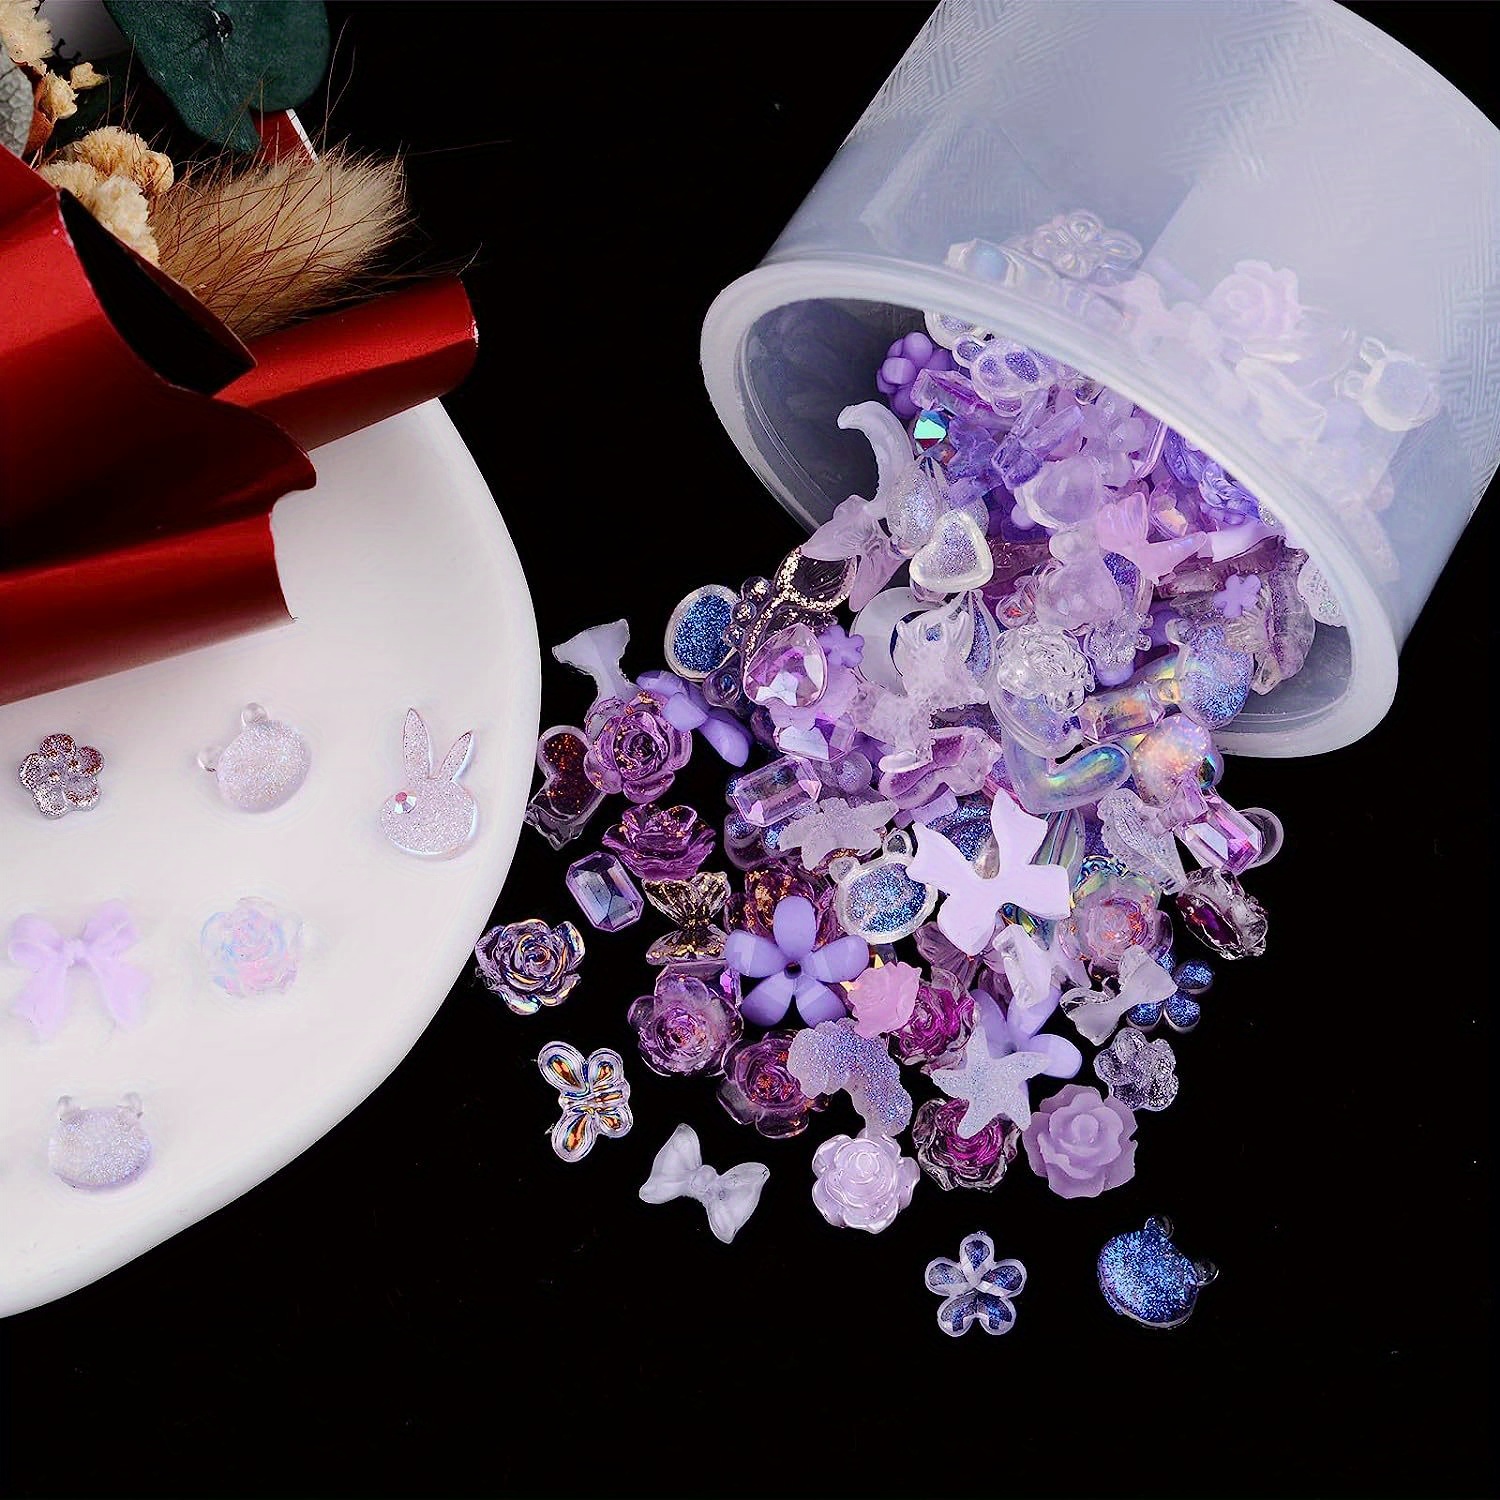 Colored Iridescent Jewels - Craft Supplies - 200 Pieces 